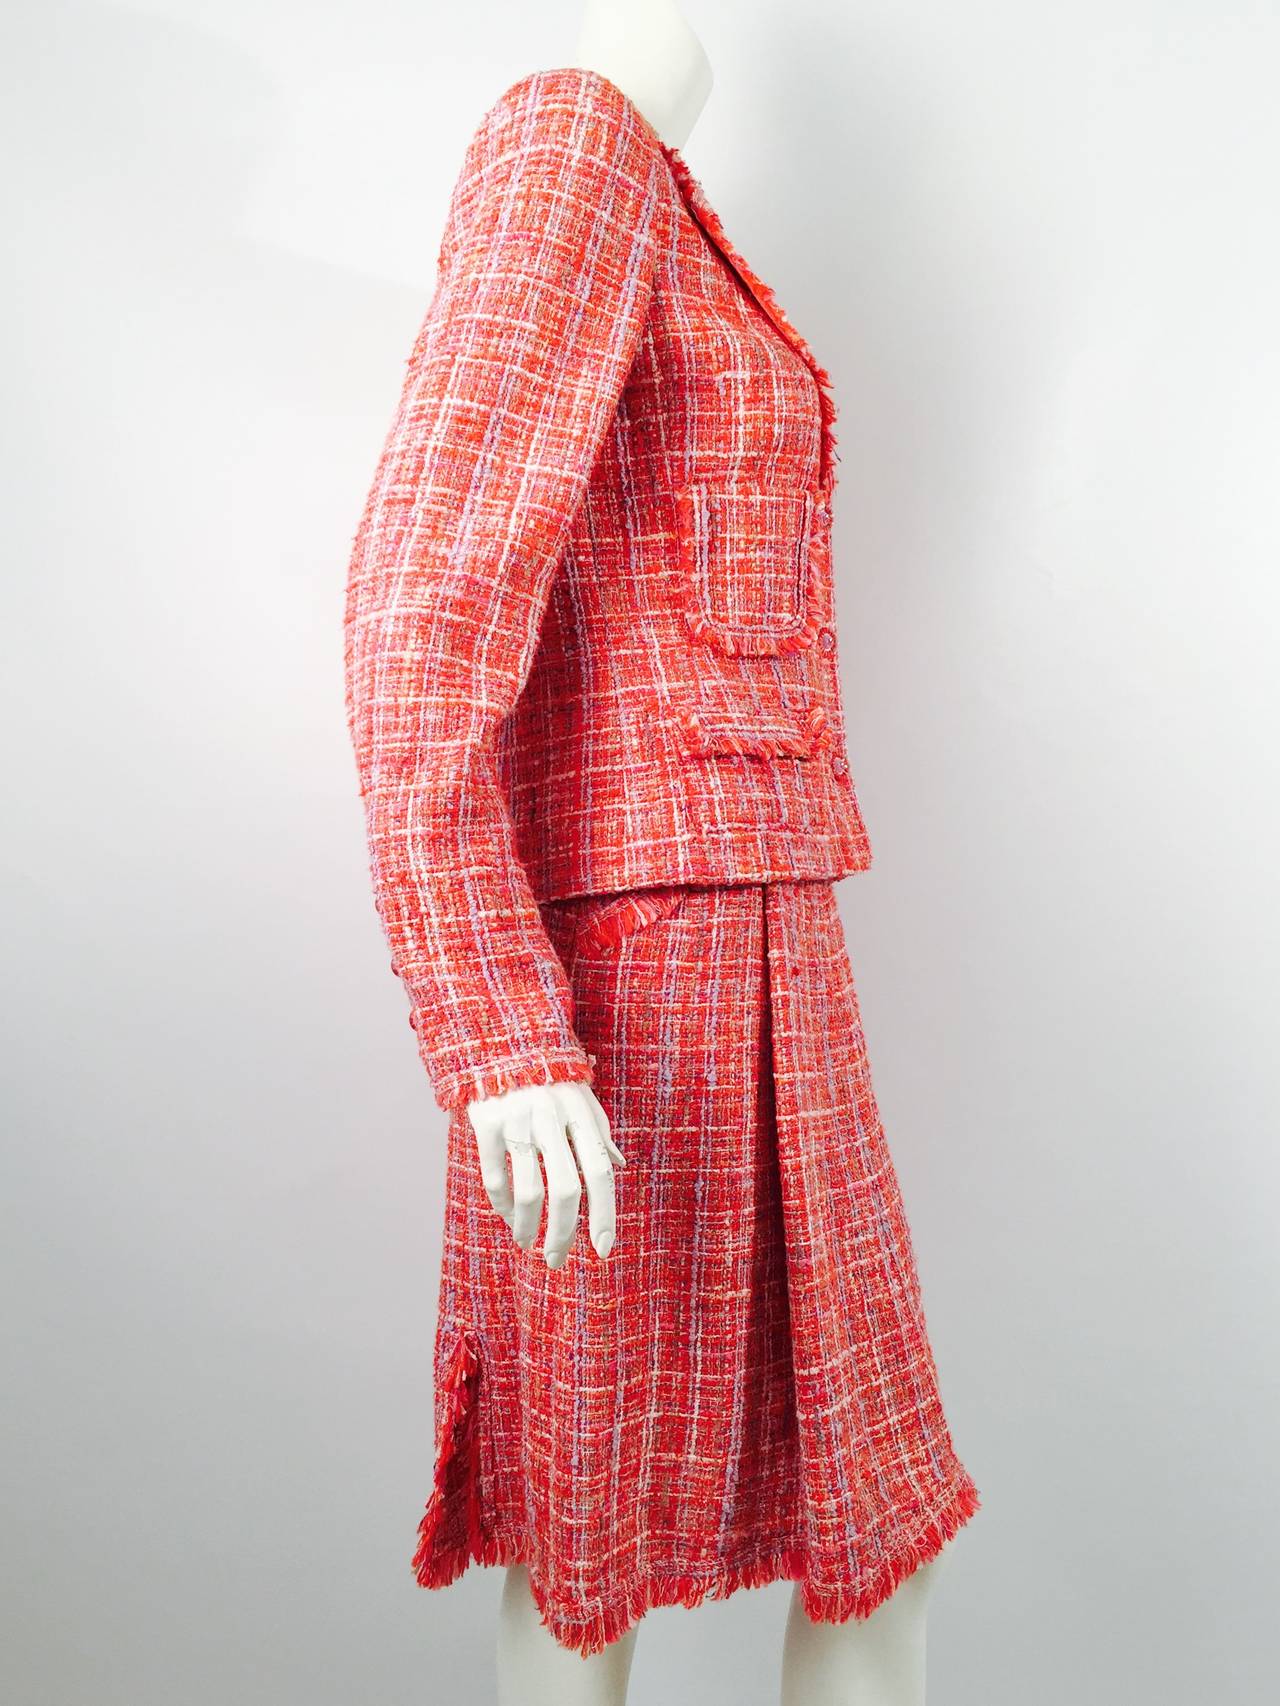 Chanel 2004 Spring Skirt Suit is true to the legend of Mademoiselle!  Primarily red cotton blend tweed is fringed at collar, cuffs, pocket flaps and skirt hem.  Skirt front has bold box pleat and three flirty back slits.  Skirt also has two front